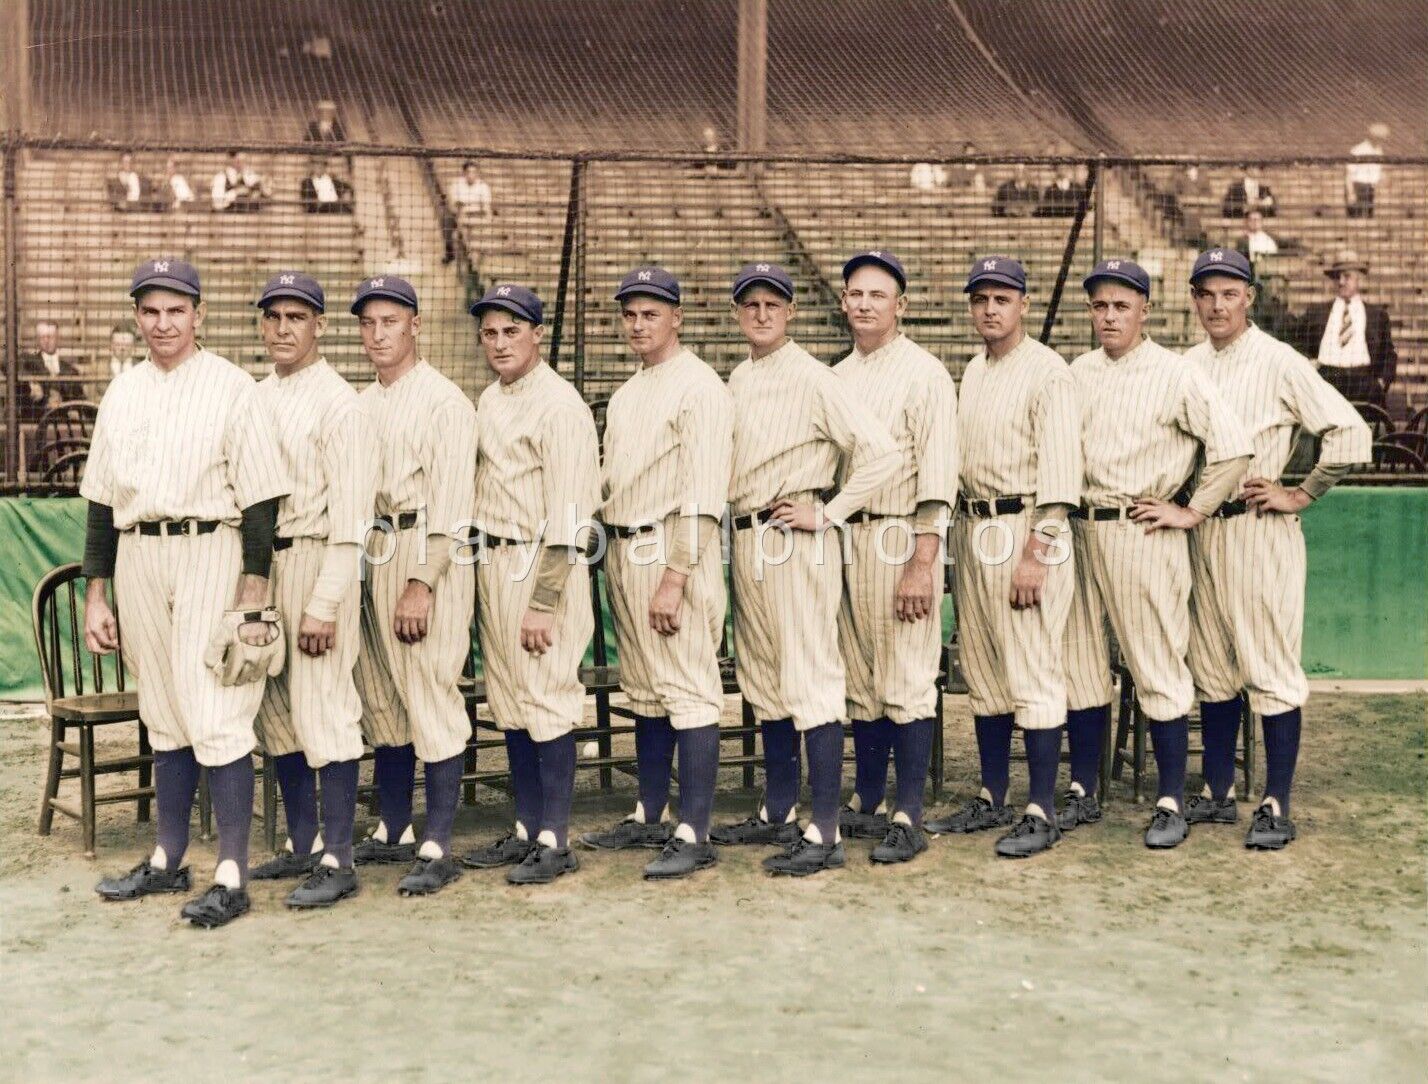 1923 New York Yankees Pitching Staff Colorized 8x10 Print-FREE SHIPPING